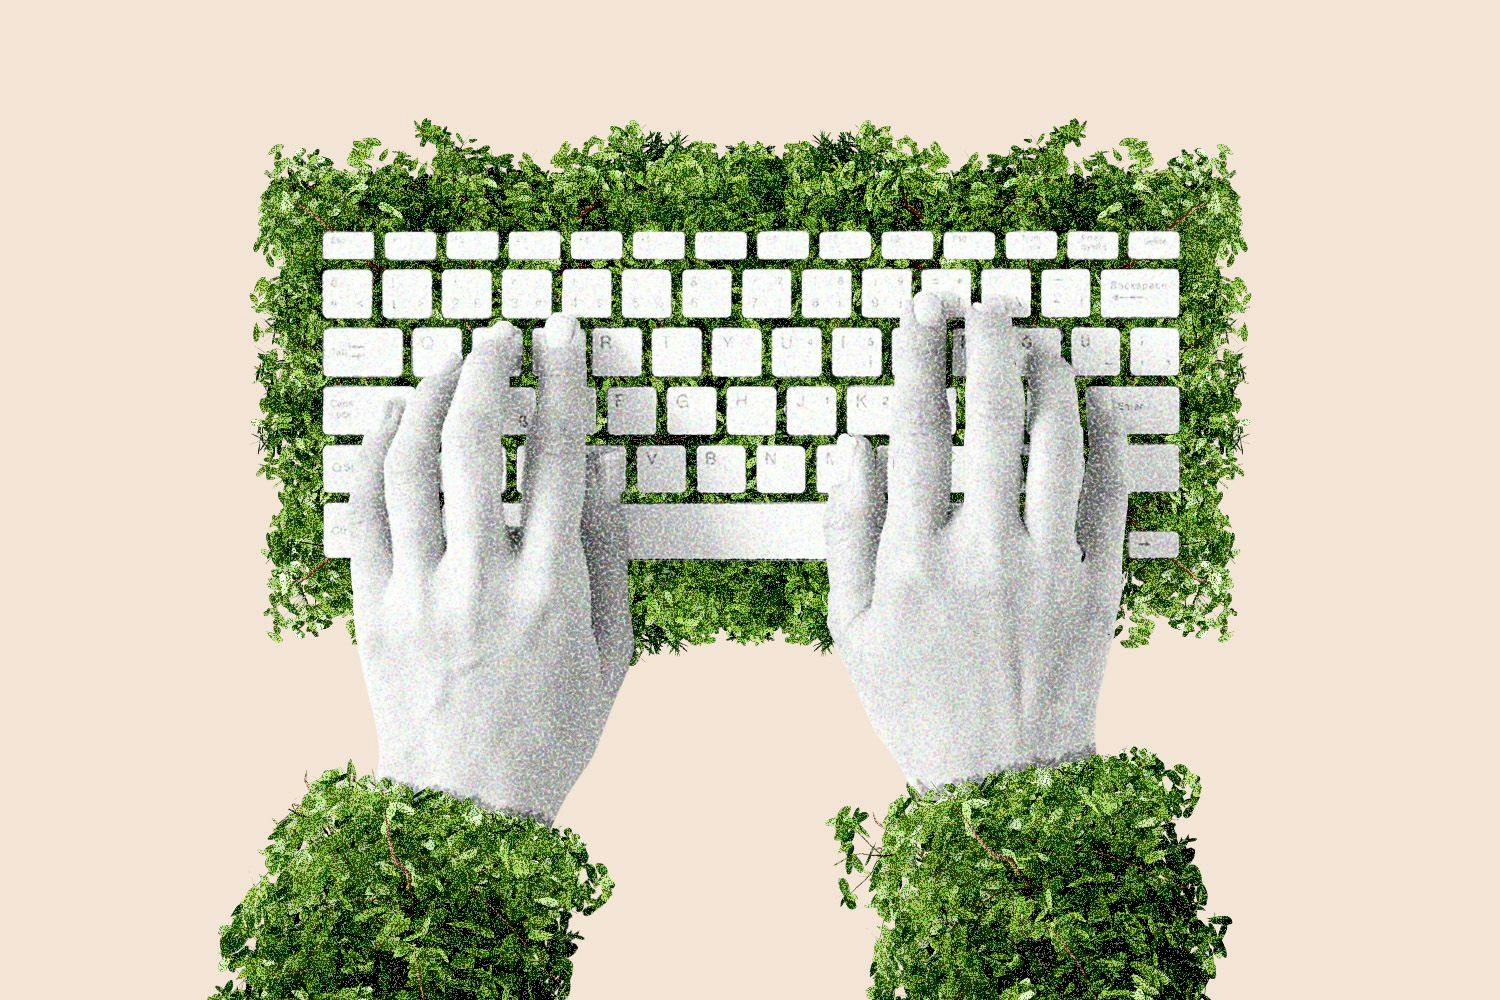 Hands typing on a keyboard covered in greenery